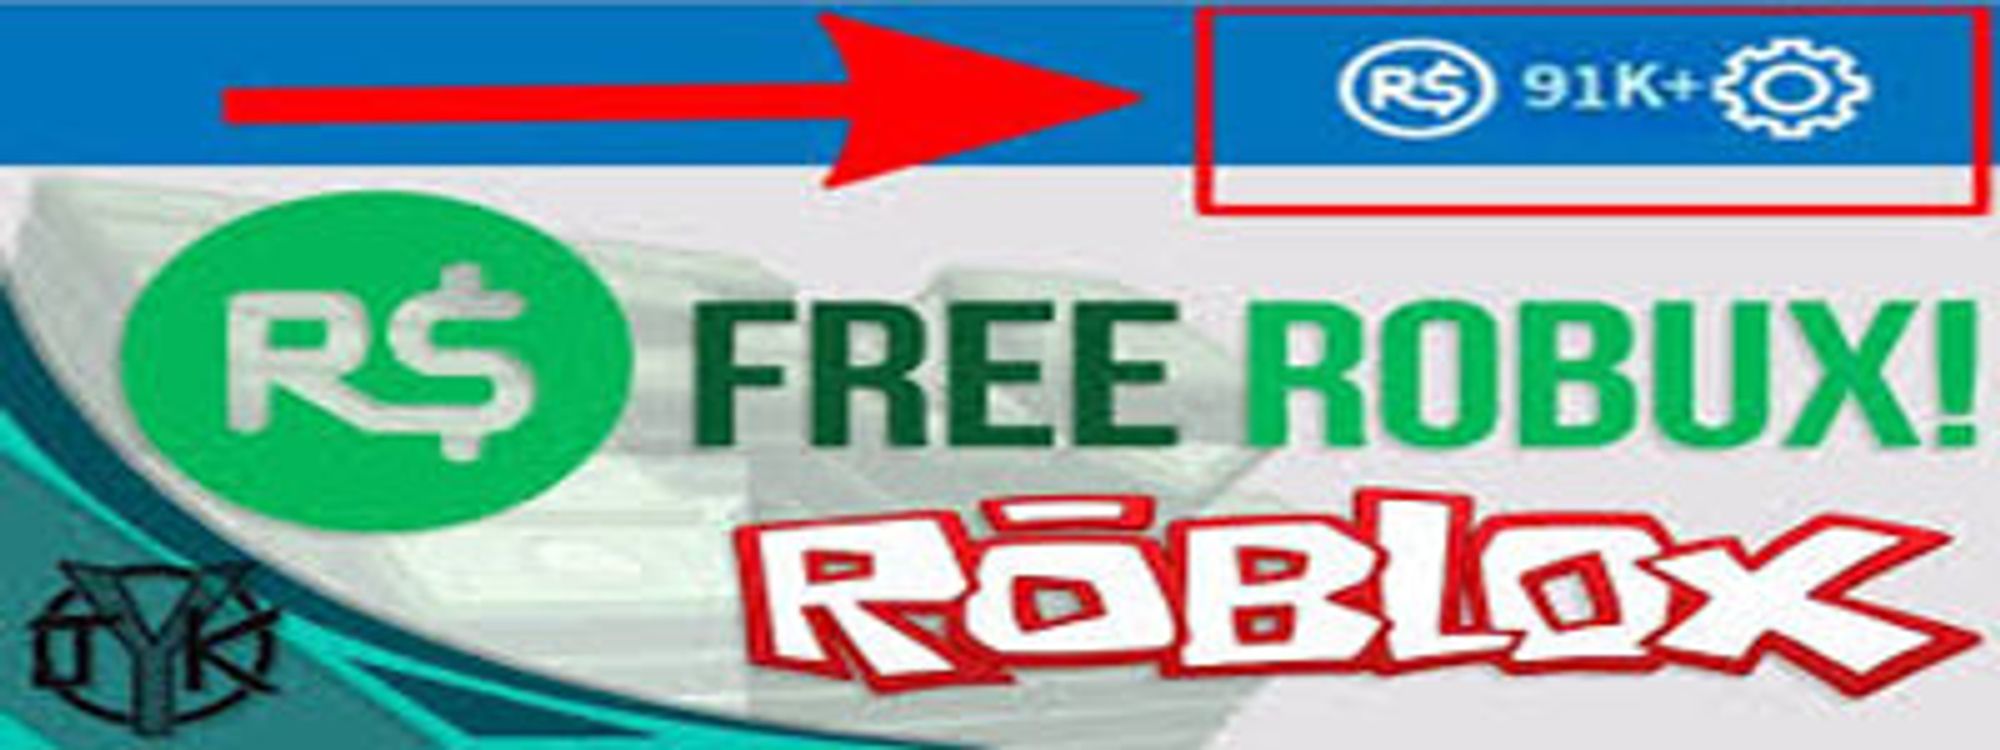 Roblox Robux Free Roblox Robux Codes With Skins Password Account 2020 - autosfanatics on twitter how to get free robux freerobux